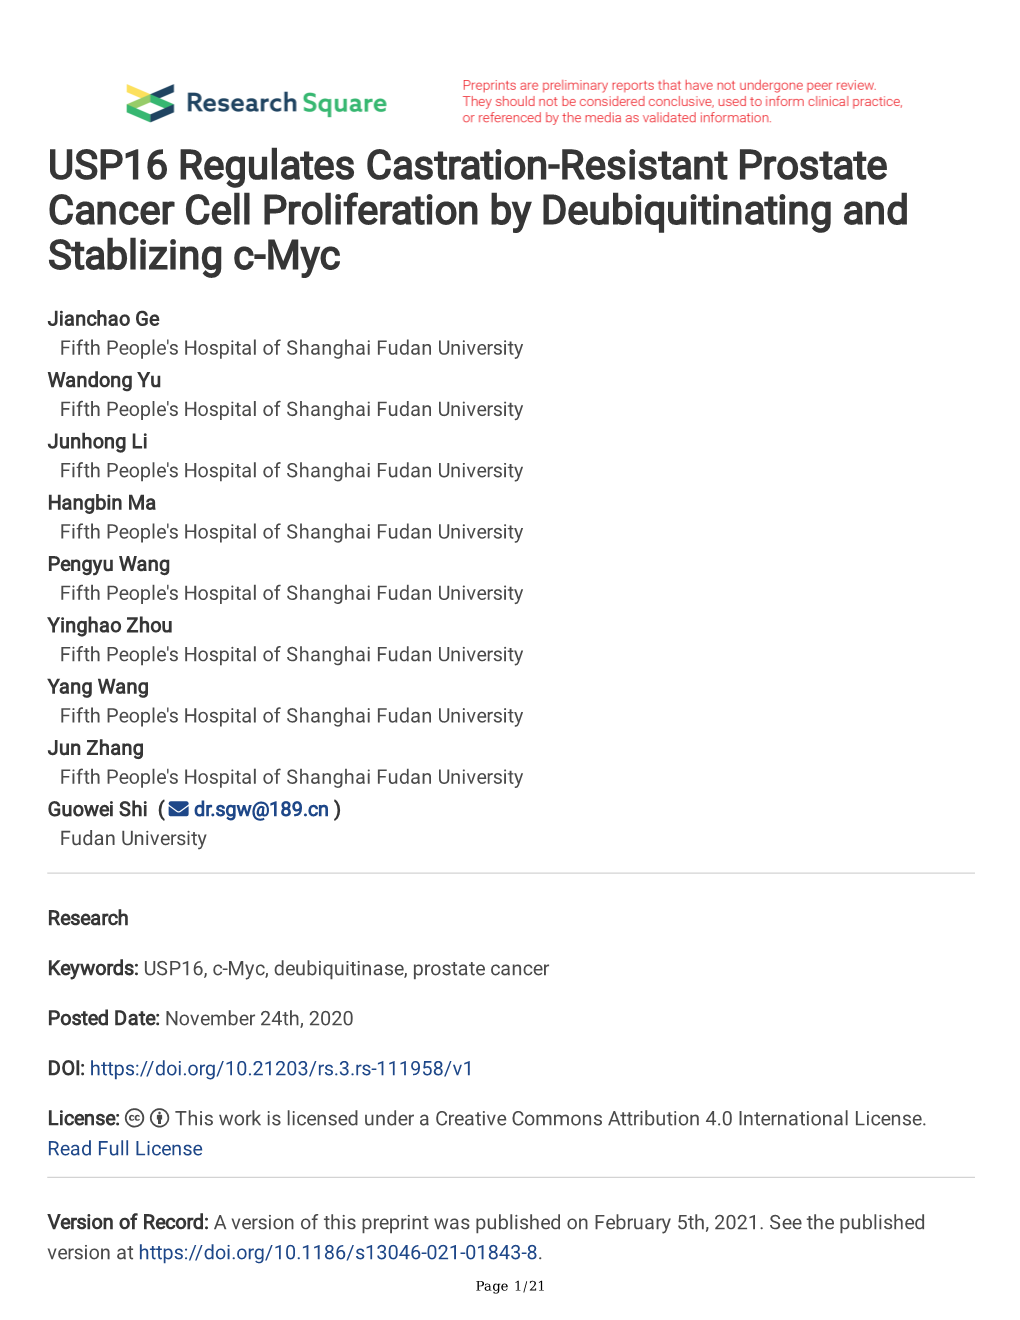 USP16 Regulates Castration-Resistant Prostate Cancer Cell Proliferation by Deubiquitinating and Stablizing C-Myc